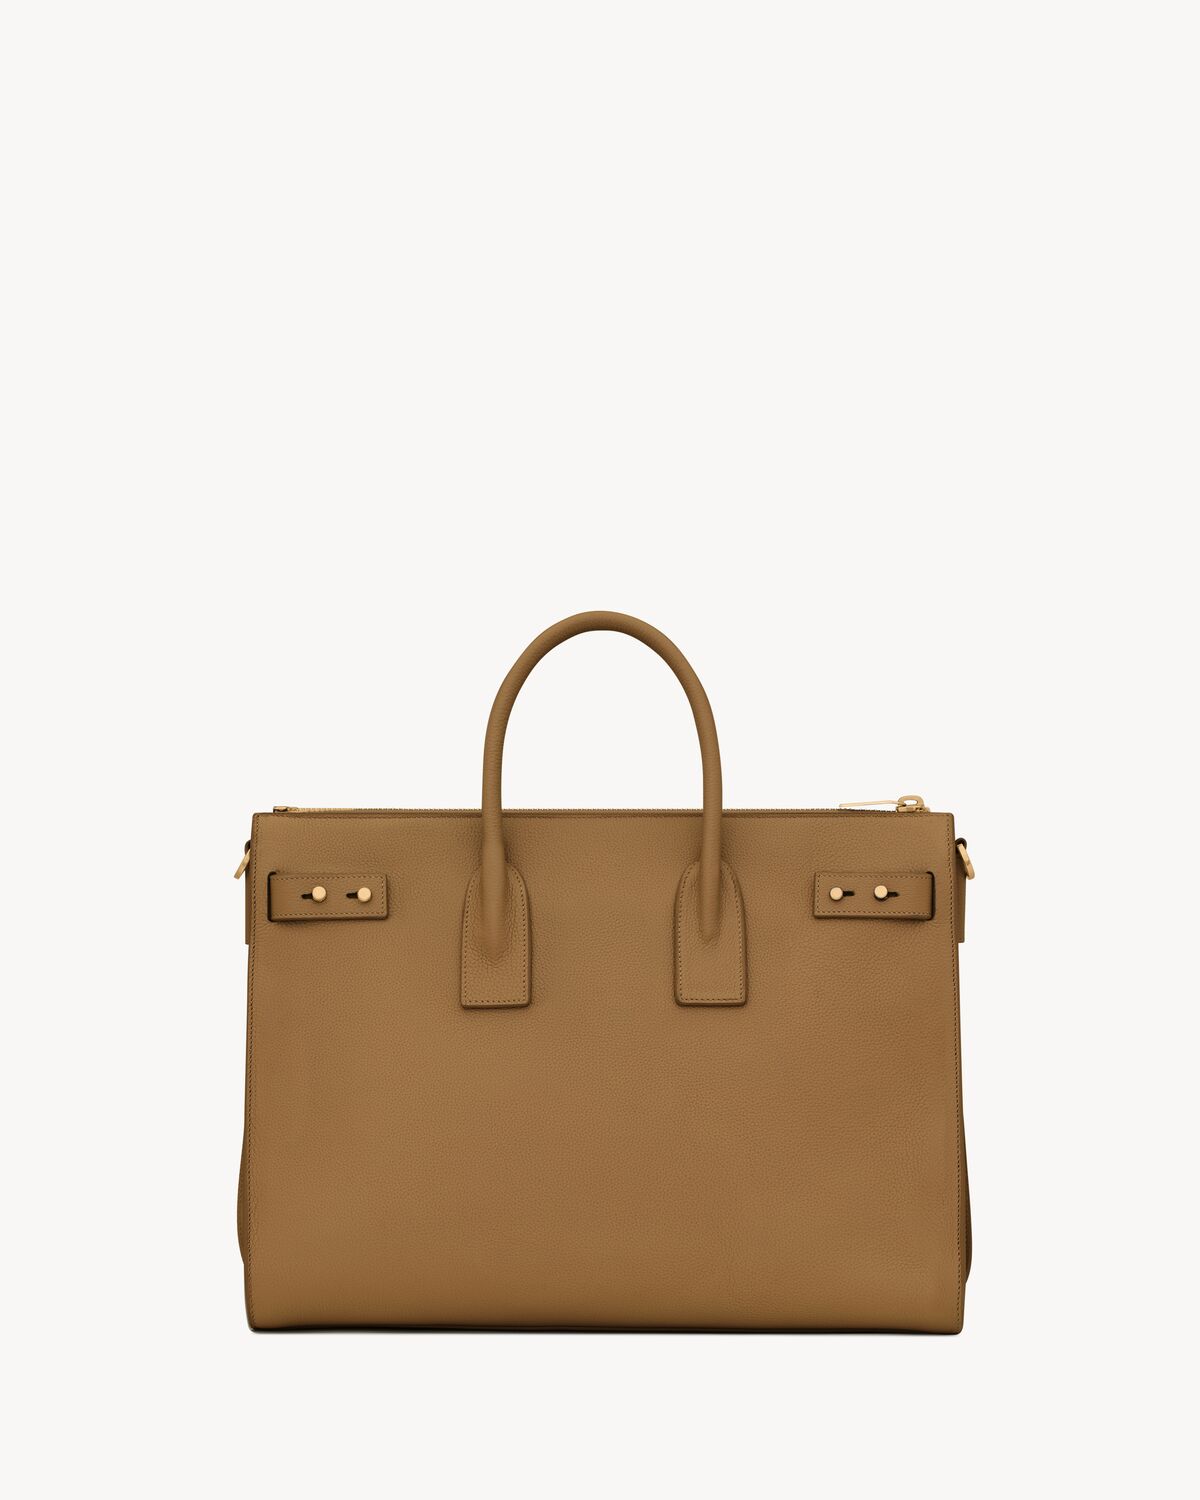 SAC DE JOUR THIN LARGE IN GRAINED LEATHER